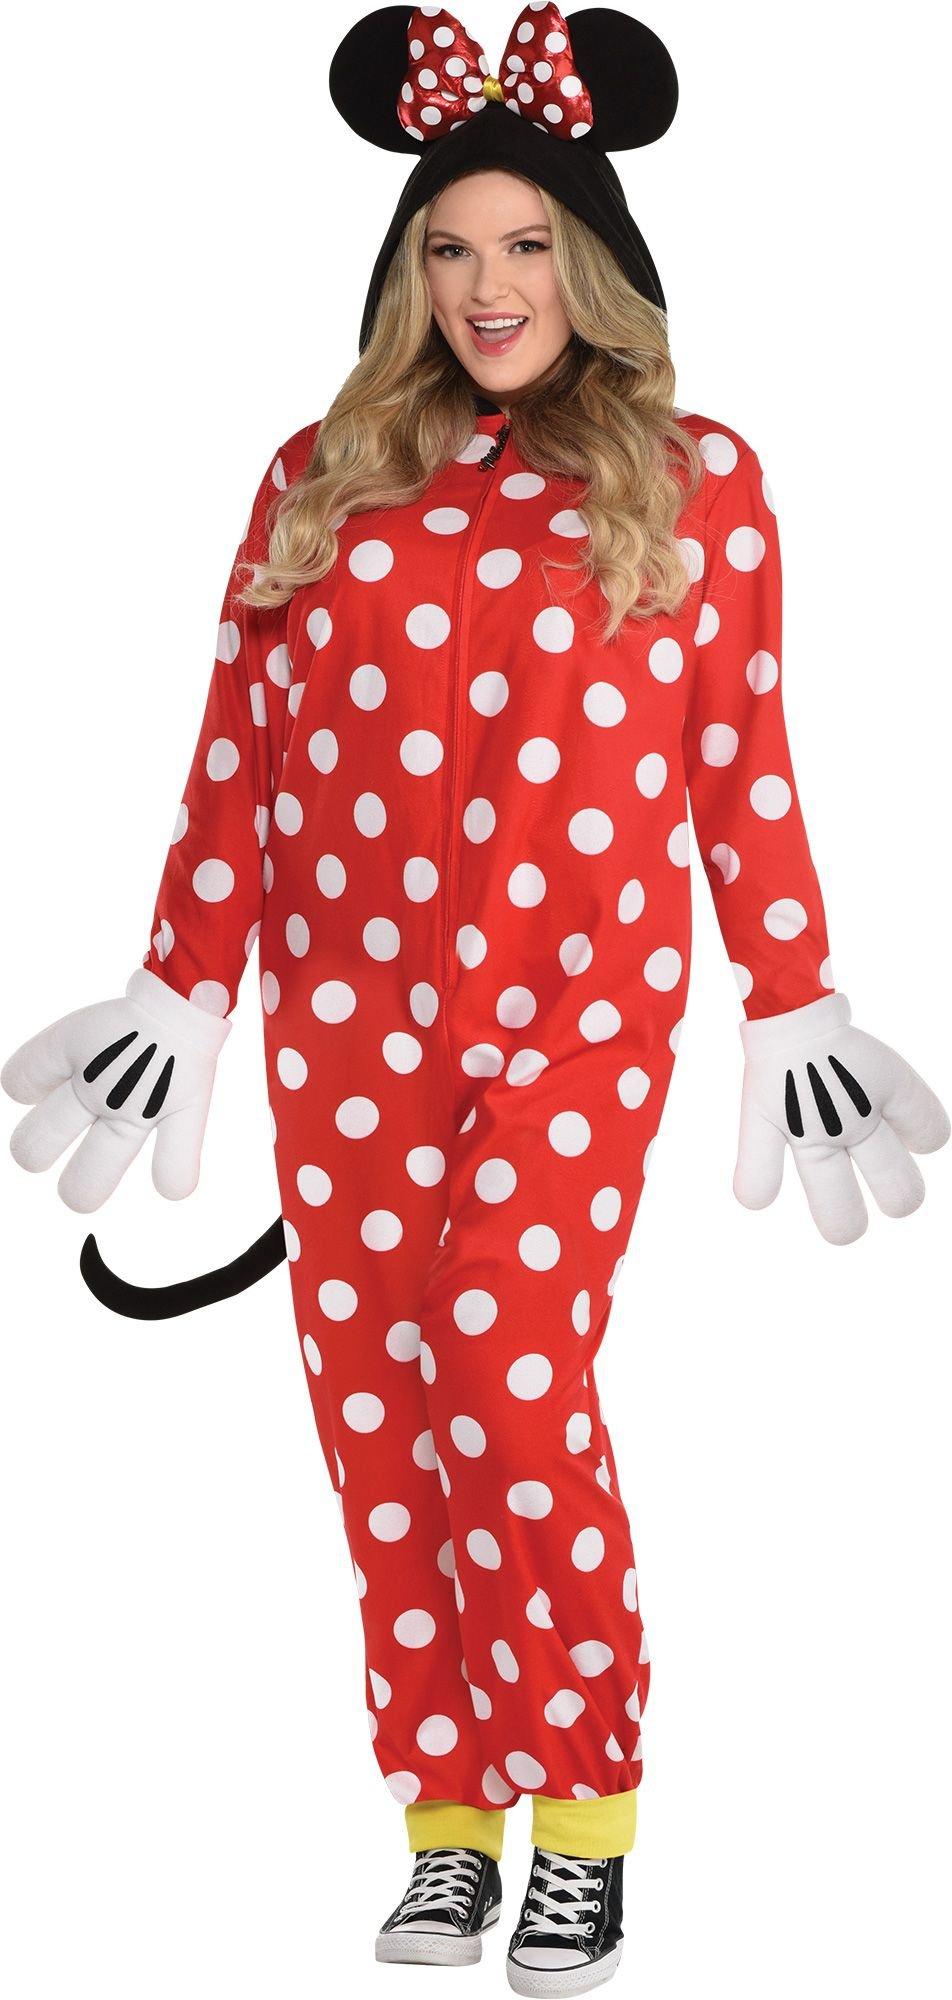 Adult Zipster Red Polka Dot Minnie Mouse One Piece Costume Plus